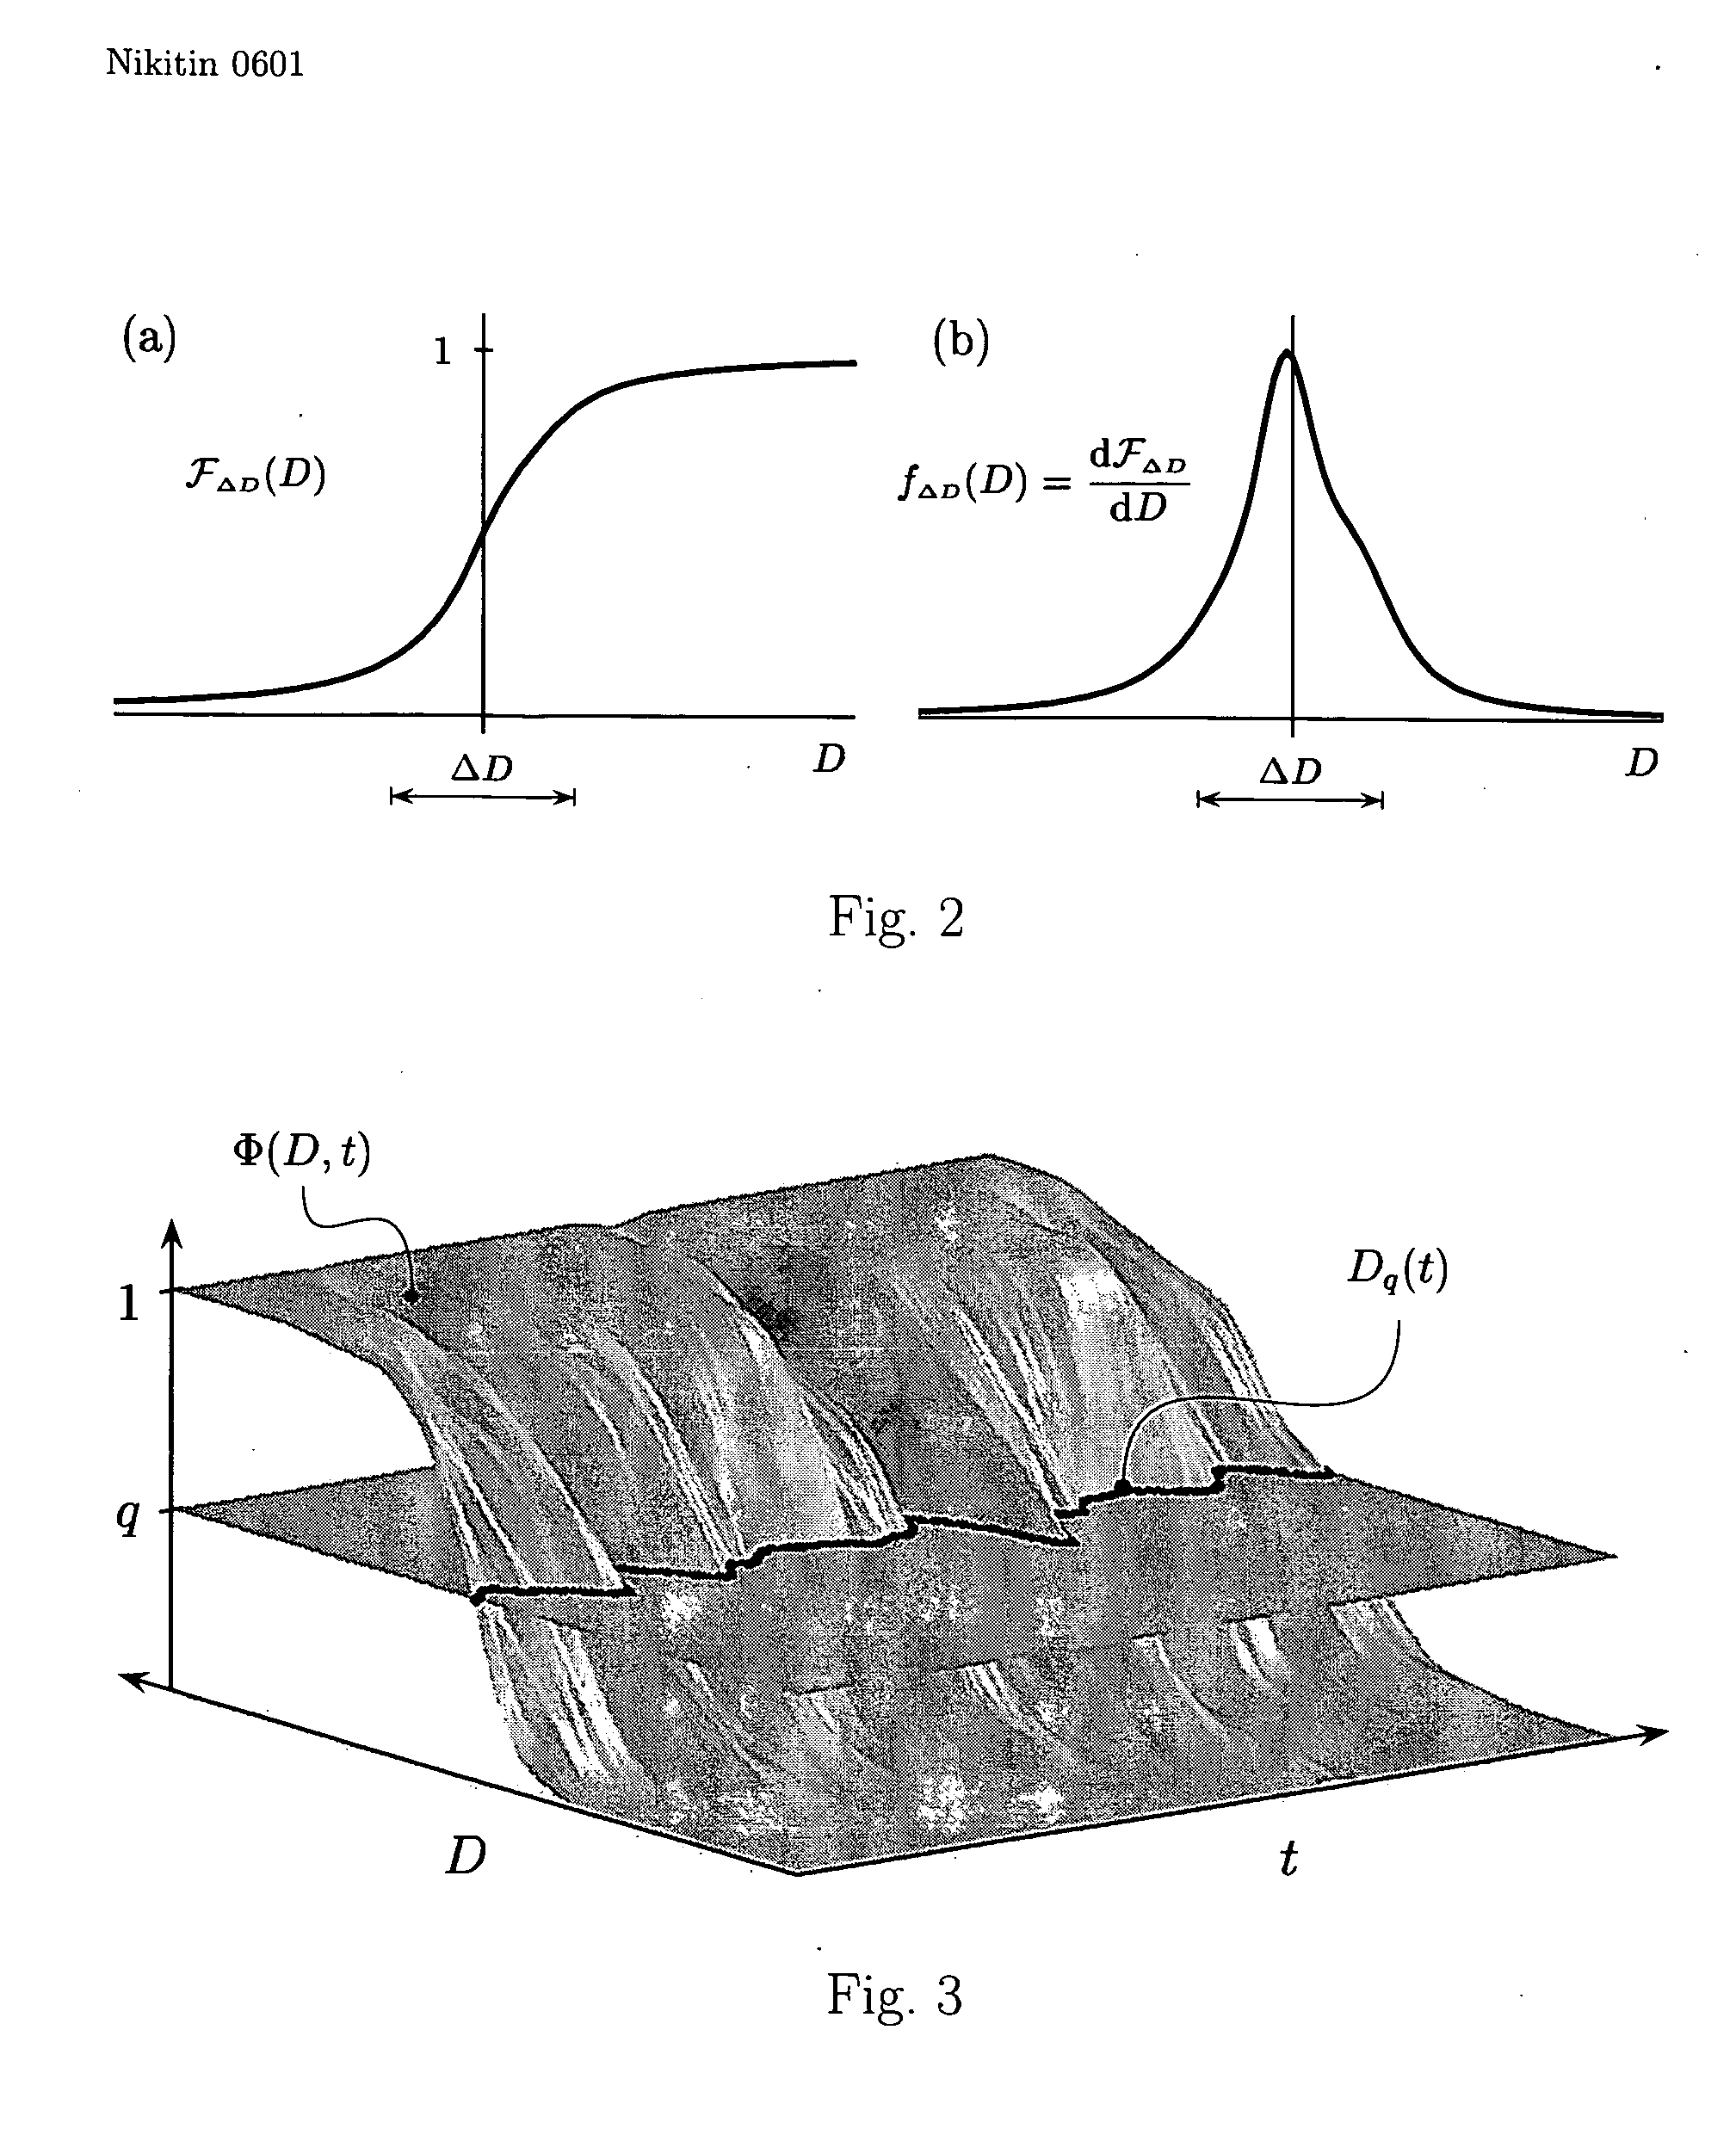 Method and apparatus for adaptive real-time signal conditioning, processing, analysis, quantification, comparison, and control